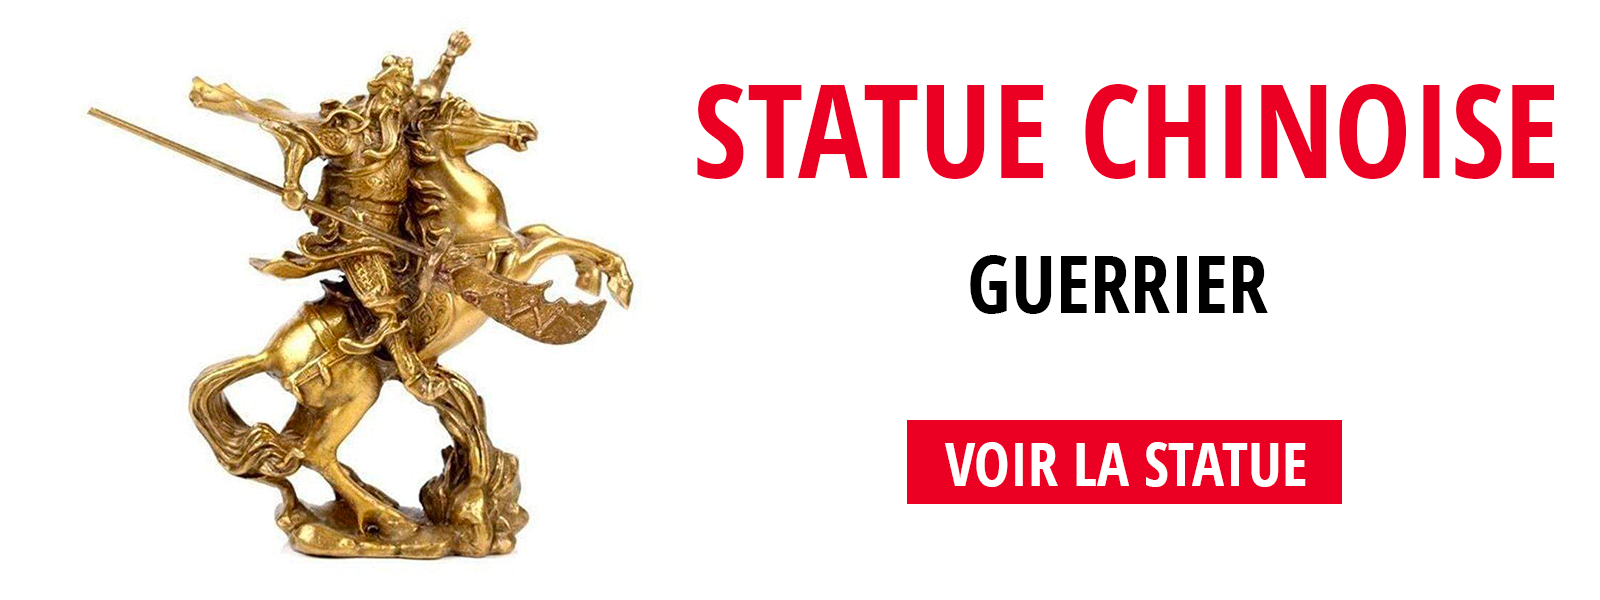 Statue guerrier chinois